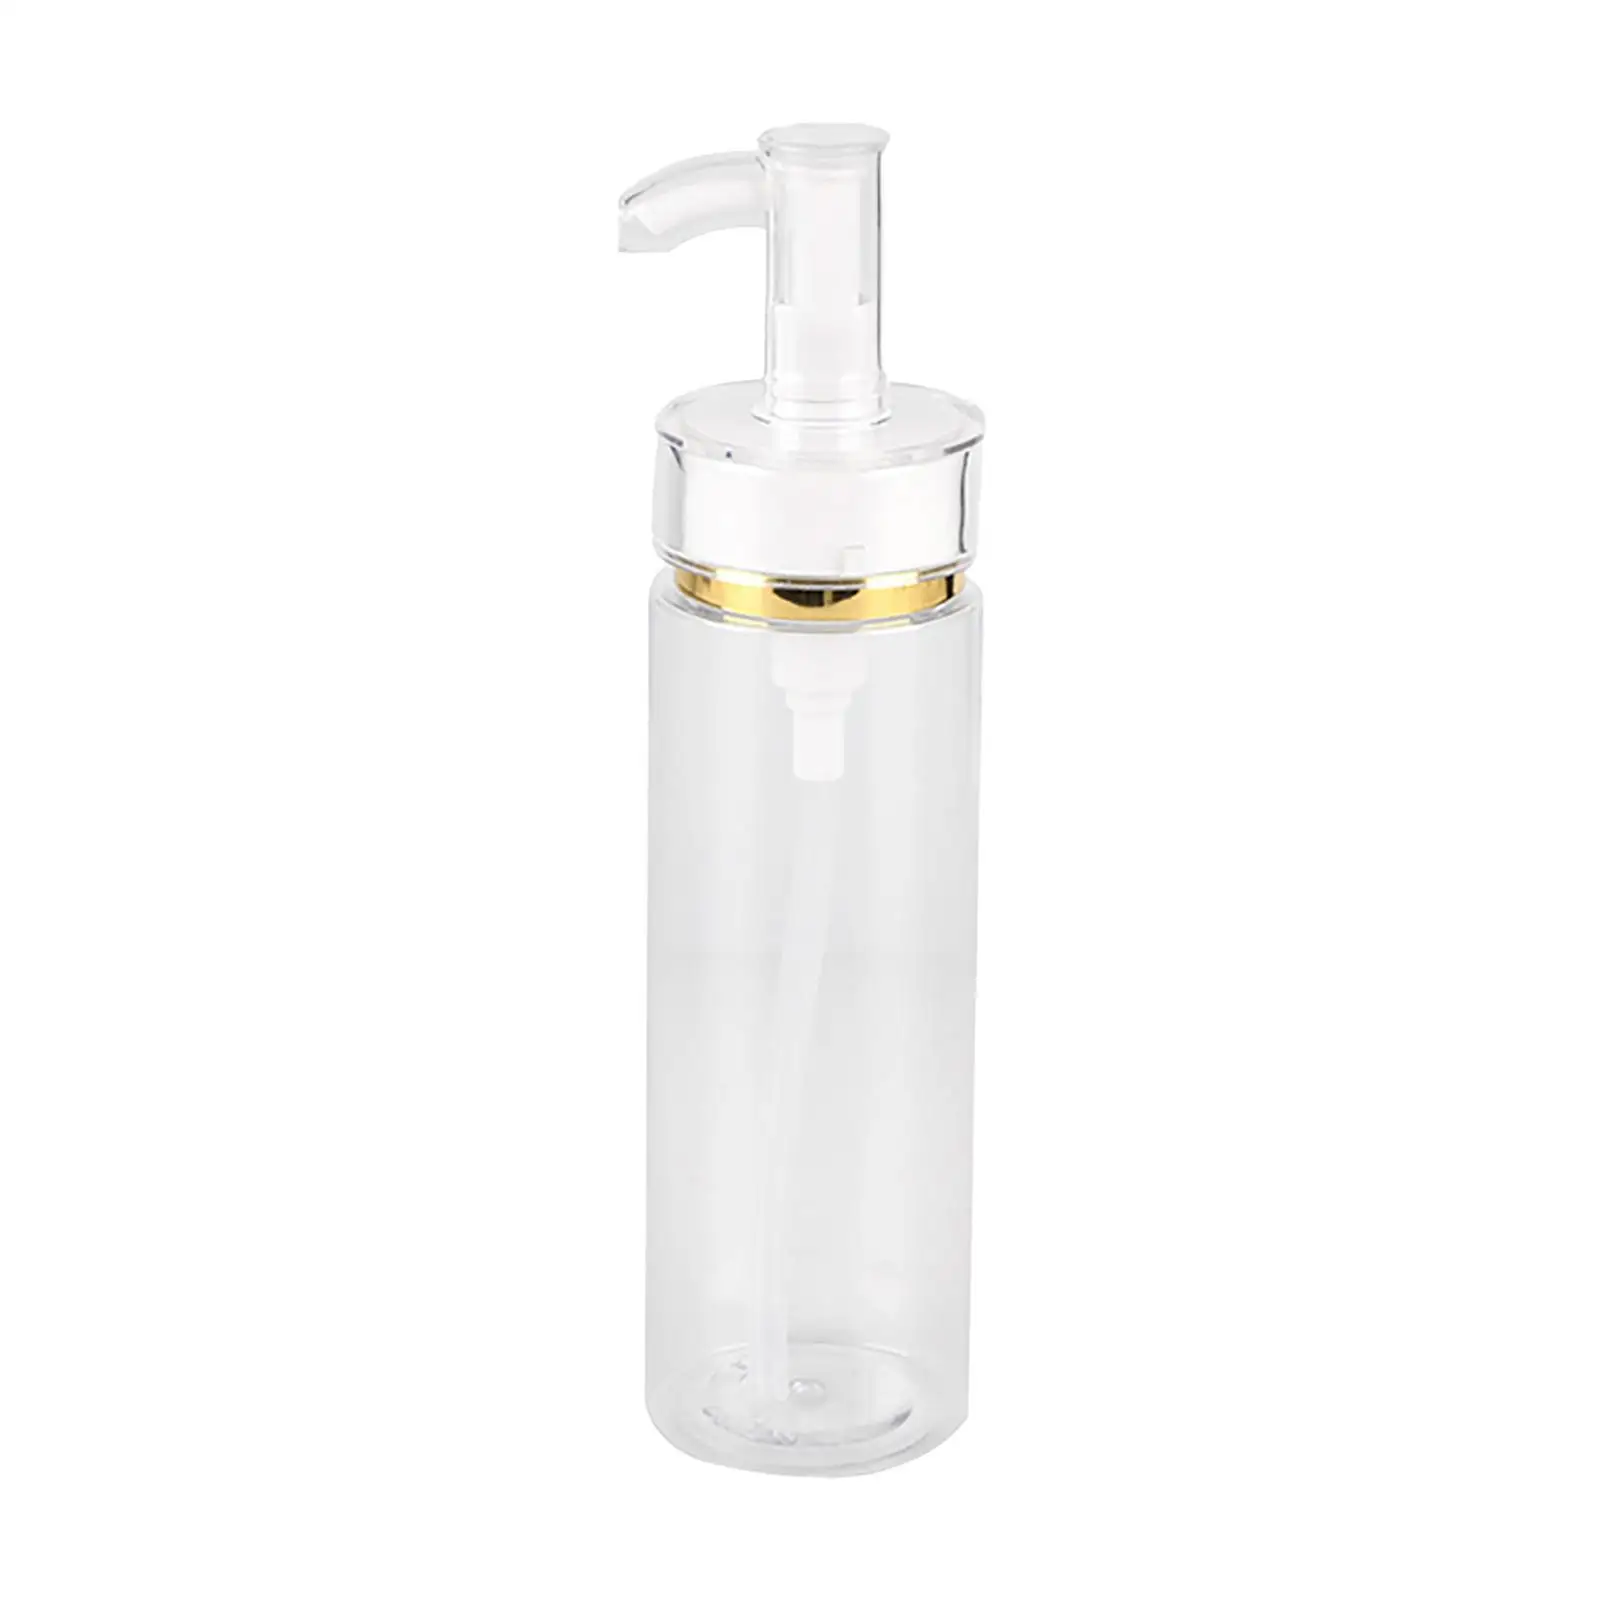 Refillable Lotion Bottles with Pumps Transparent 150ml Travel Container for Shower Shampoo Makeup Liquid Washing Soap